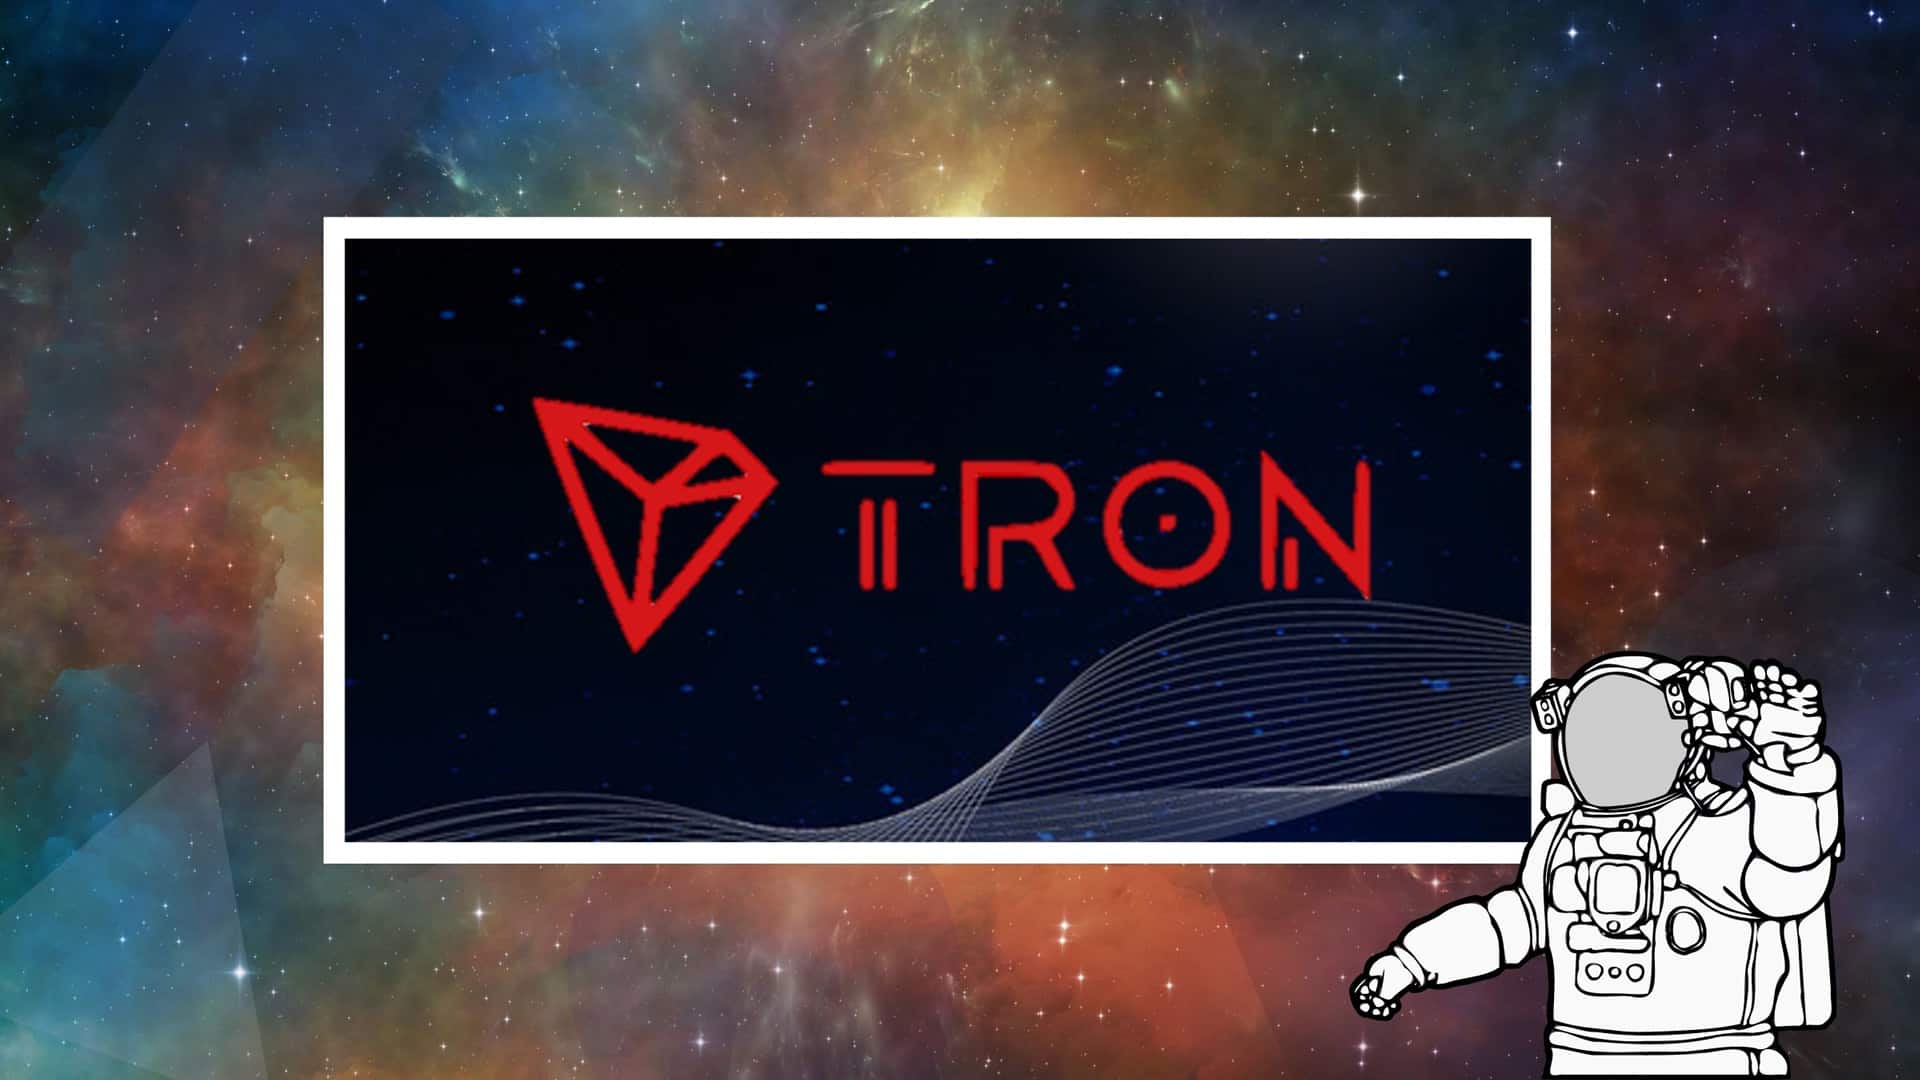 tron gamefi fund Dekaron M is a PC MMORPG that was first released in 2004 and published by Nexon. Now, the game is being rebranded as Dekaron G as they plan to bring blockchain features into the game. 